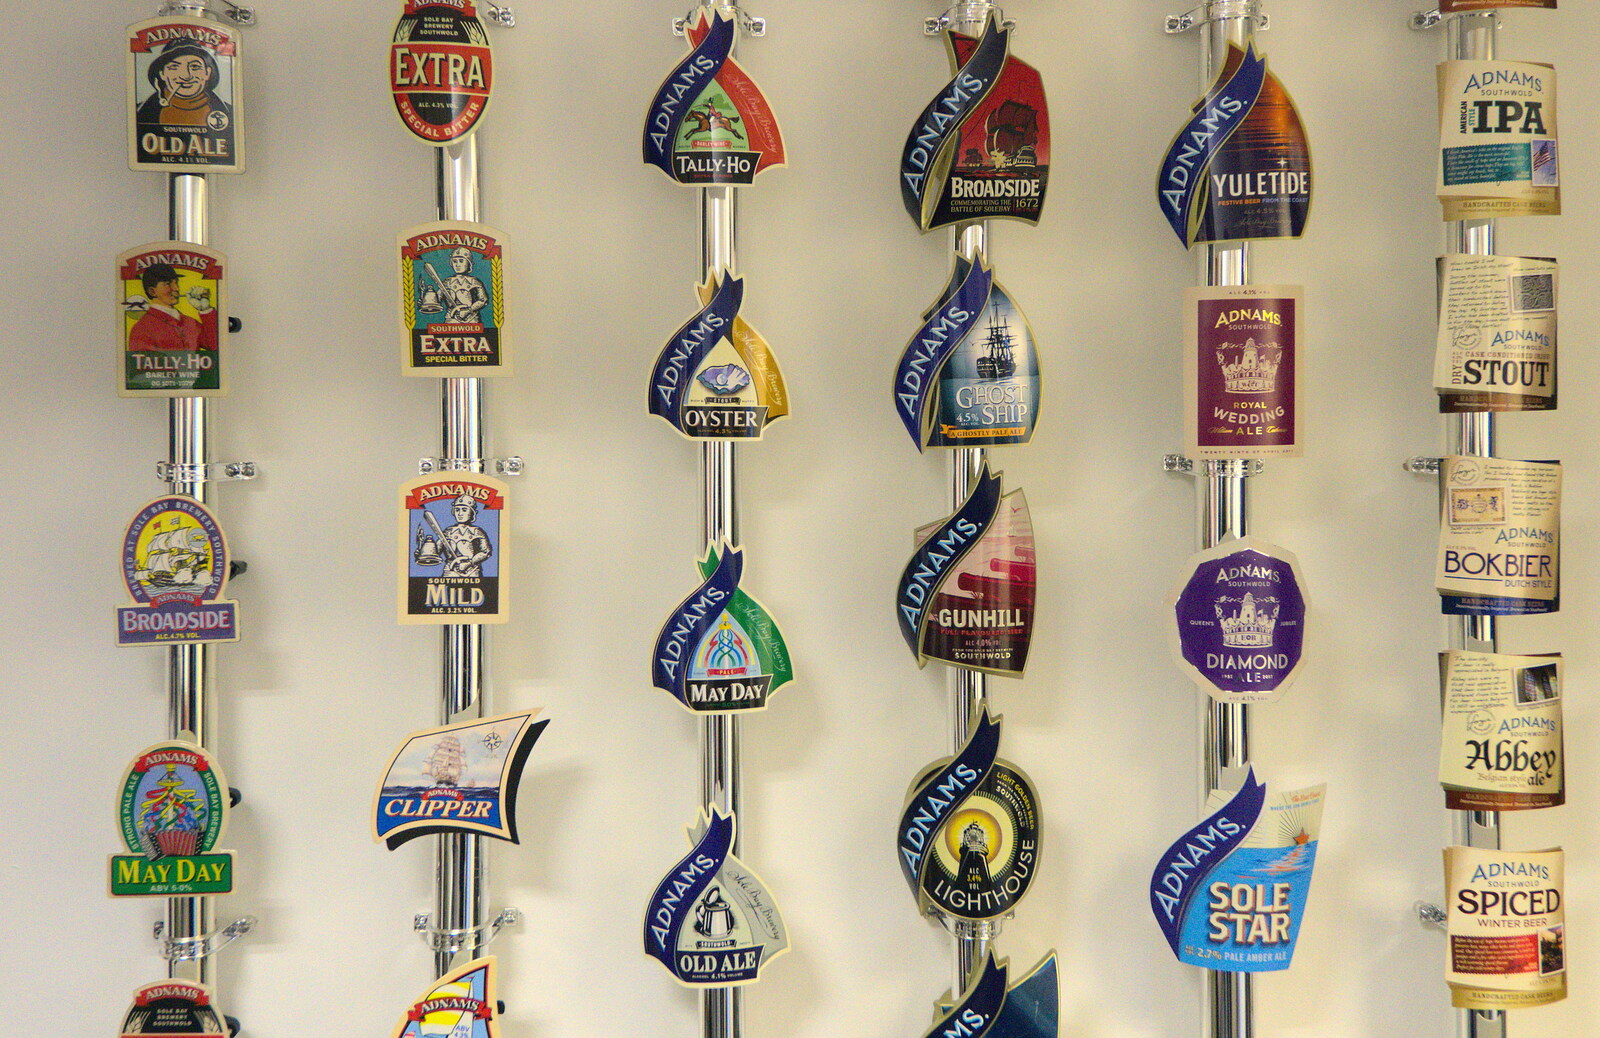 A nice collection of Adnams pump signs from Apple's Adnams Brewery Birthday Tour, Southwold, Suffolk - 29th November 2012